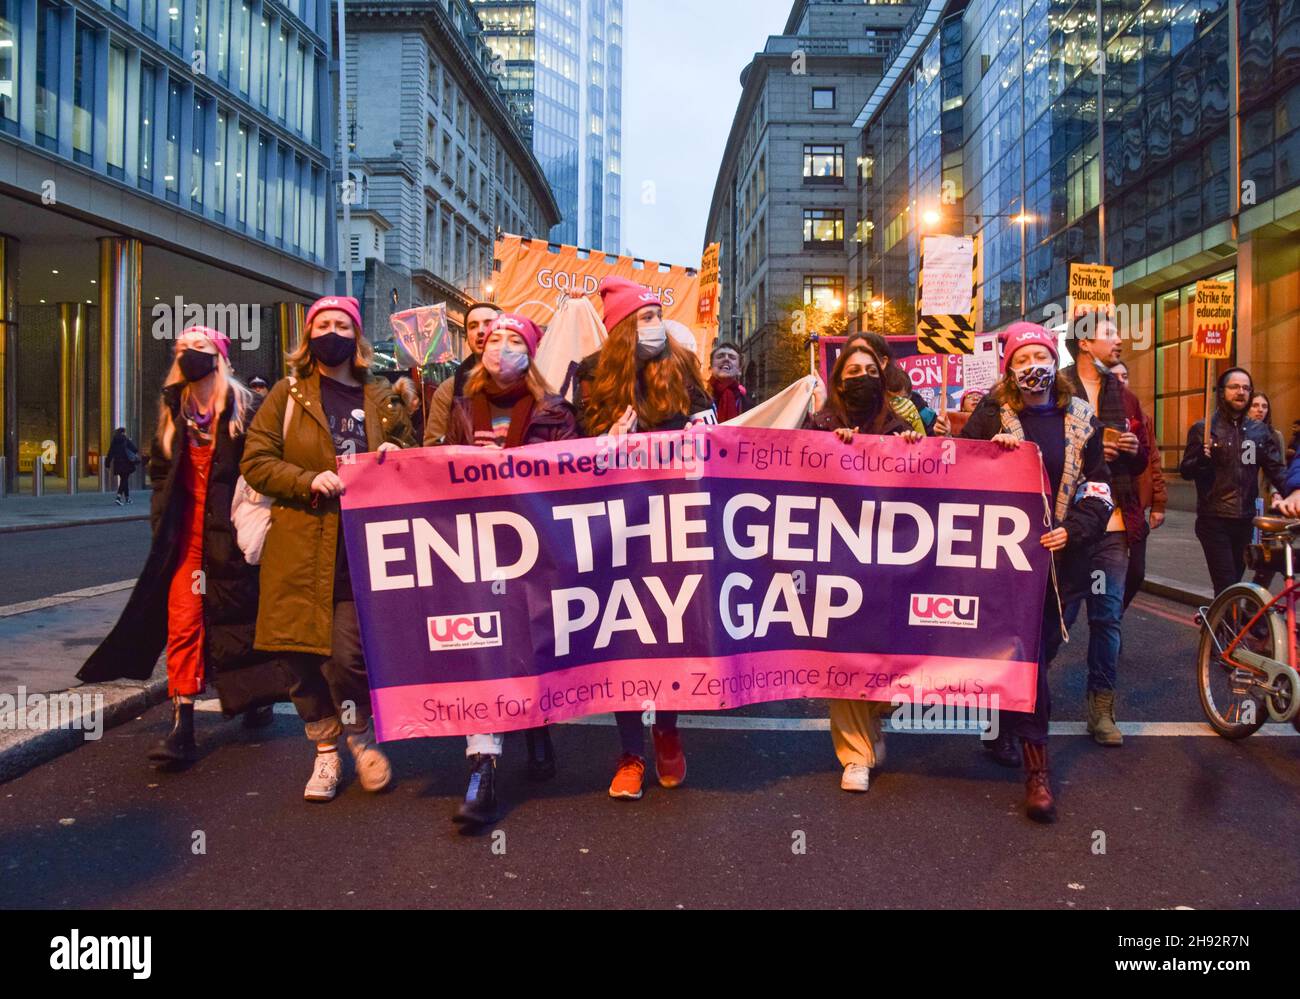 London, UK. 3rd December 2021. Protesters in the City of London. University staff and members of the University and College Union (UCU) have taken strike action and marched through Central London in protest over gender, ethnic and disability pay inequality, work conditions, and falling pay. Credit: Vuk Valcic / Alamy Live News Stock Photo